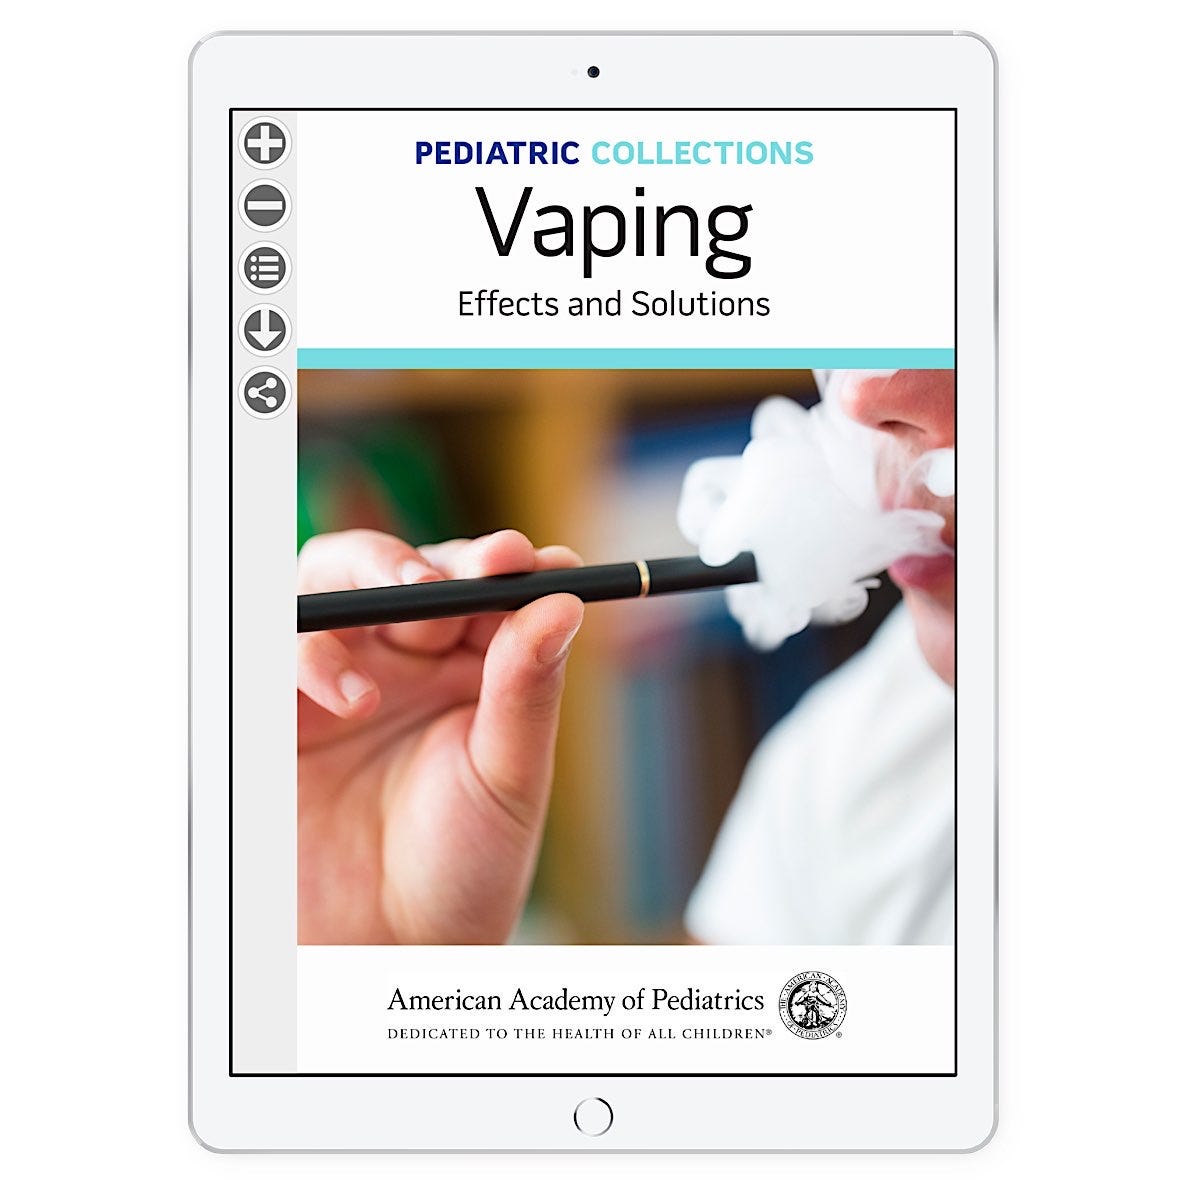 Pediatric Collections Vaping: Effects and Solutions